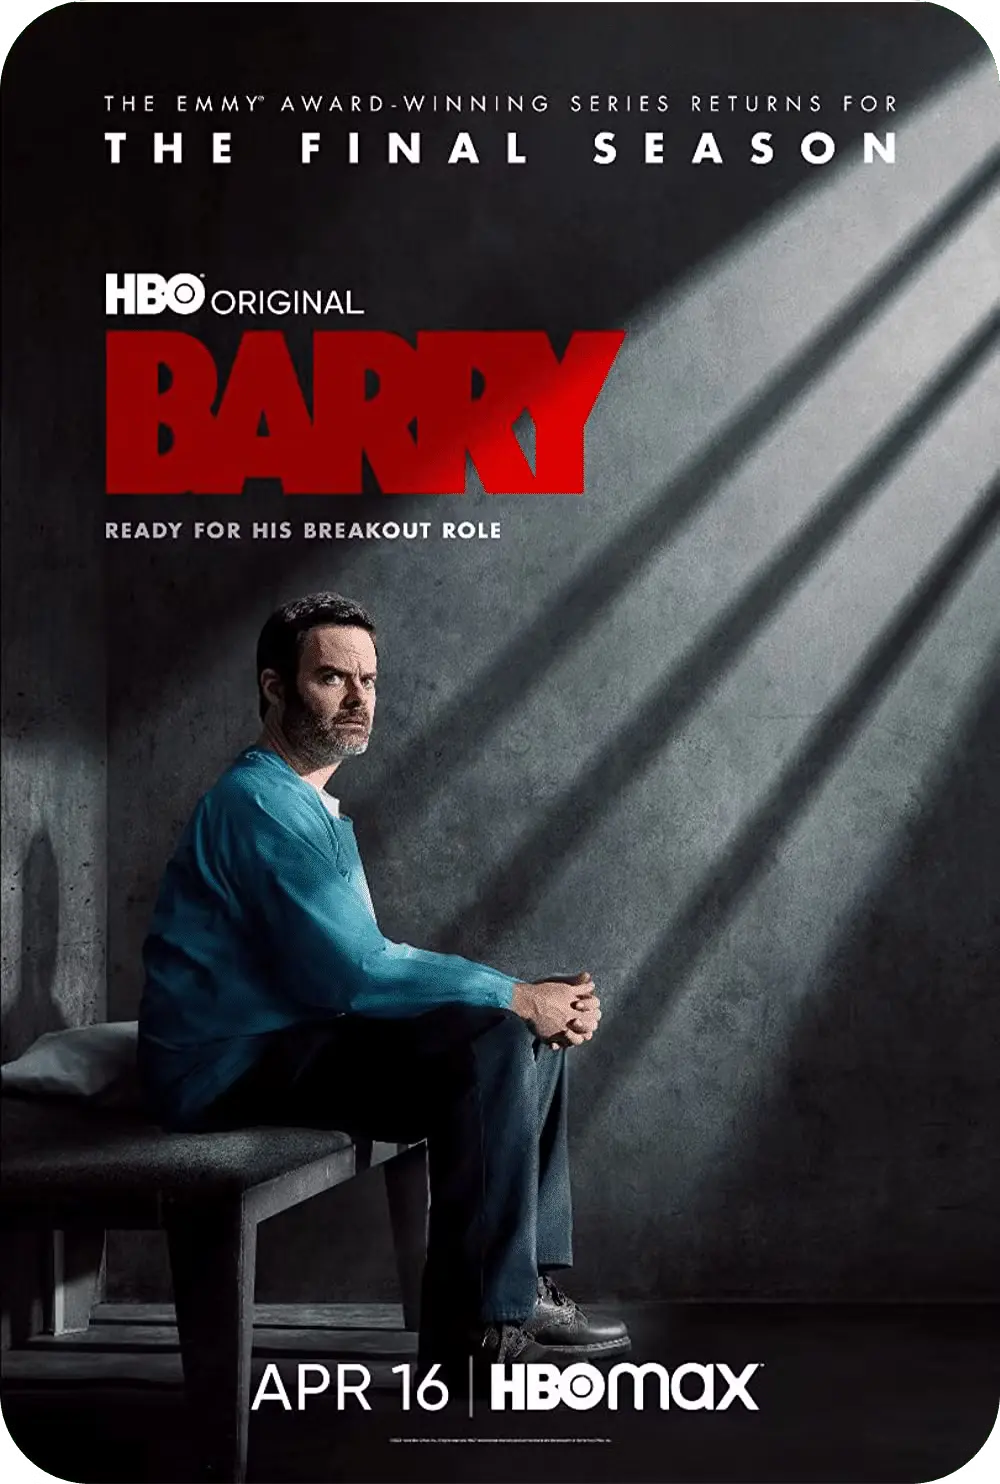 barry hbo movie